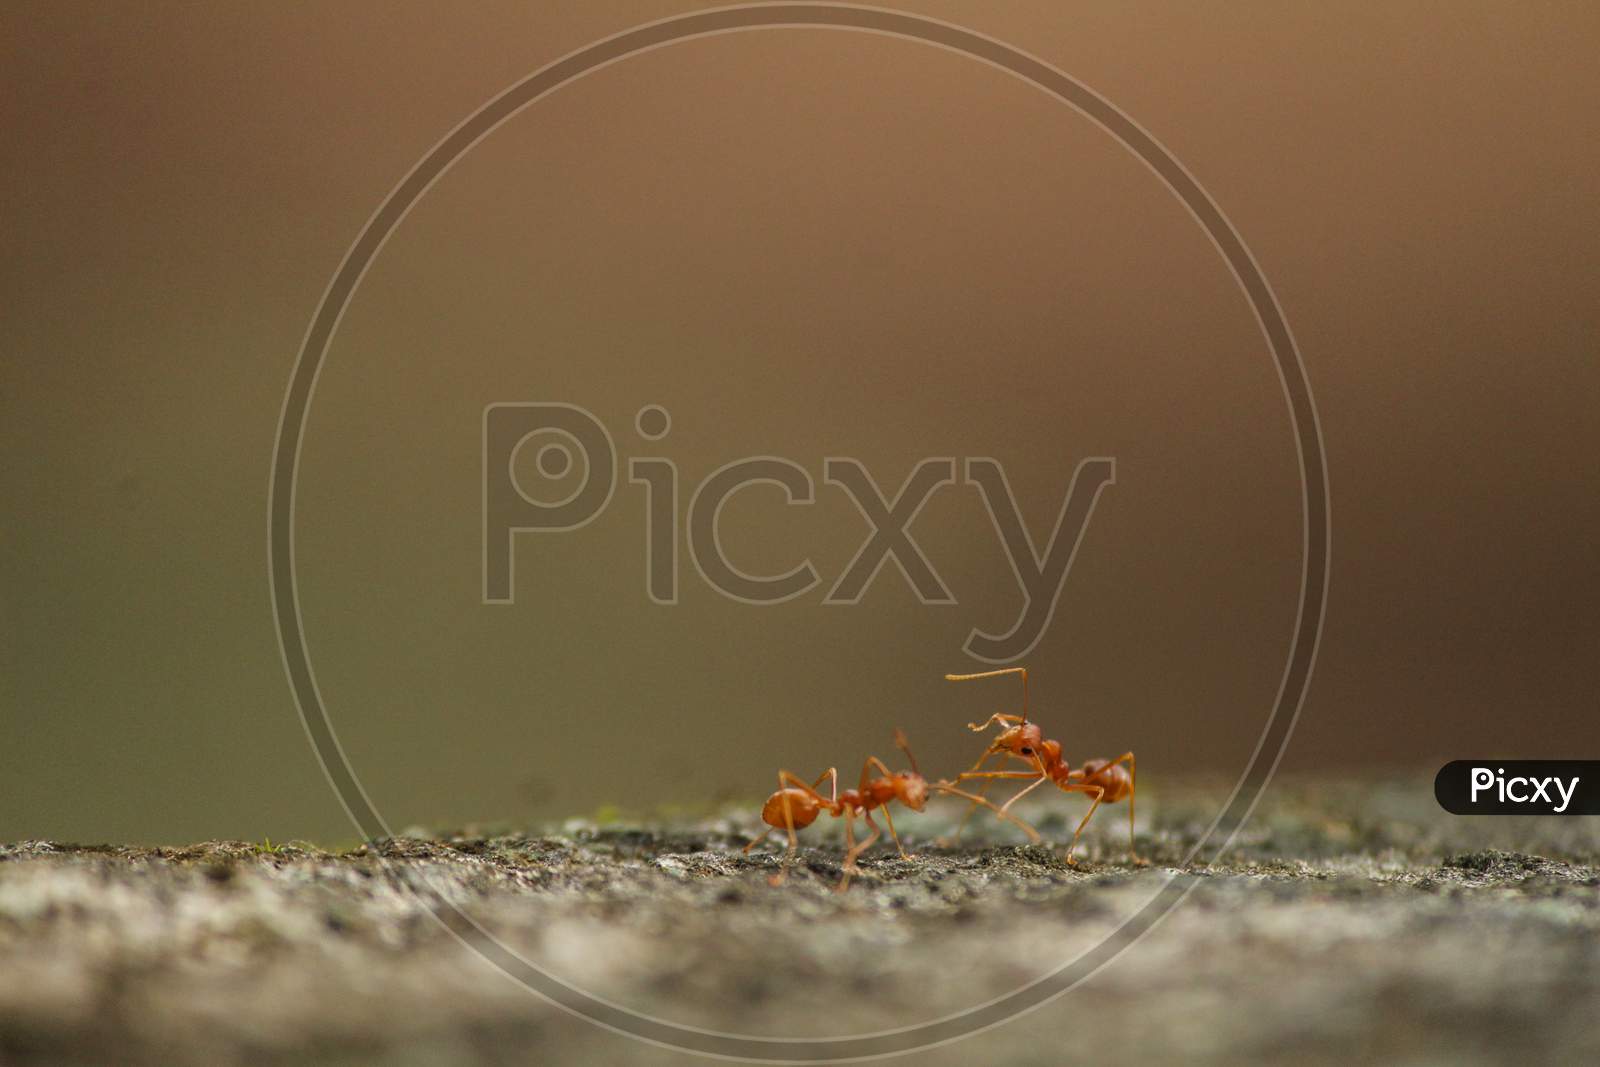 ants fighting on a rock